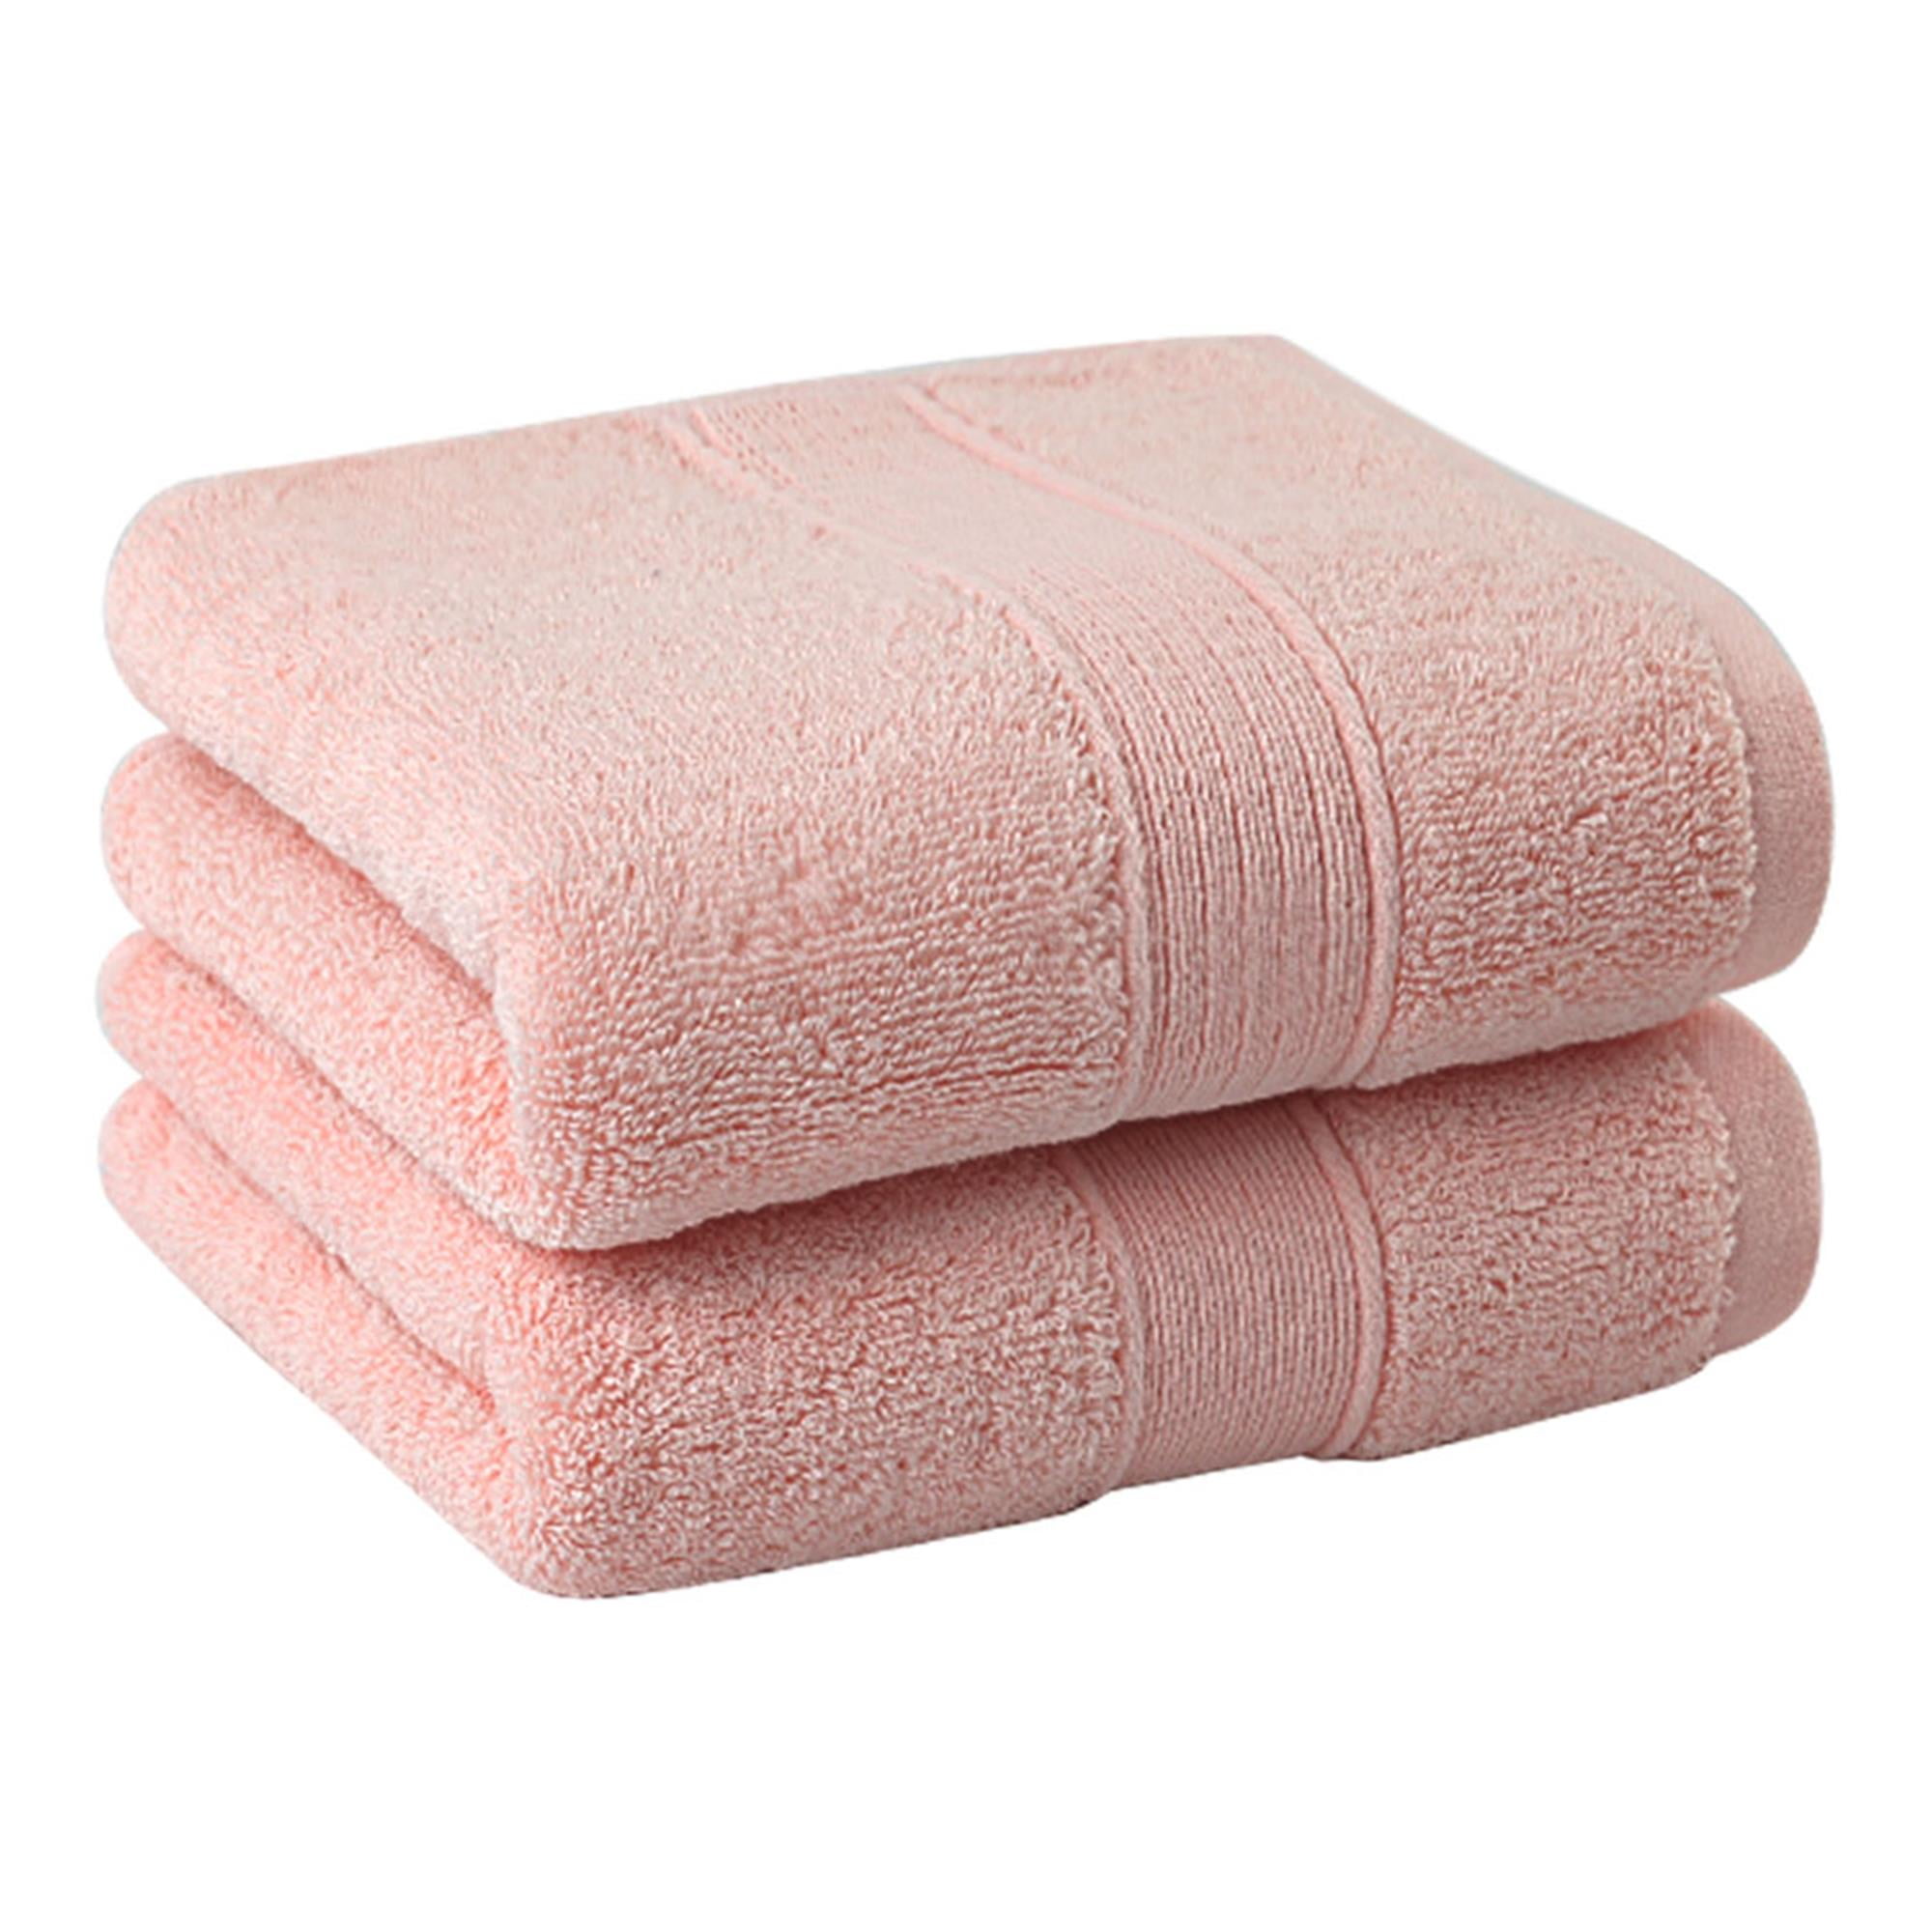 PiccoCasa 100% Cotton Hand Towels Face Towel Set Highly Absorbent